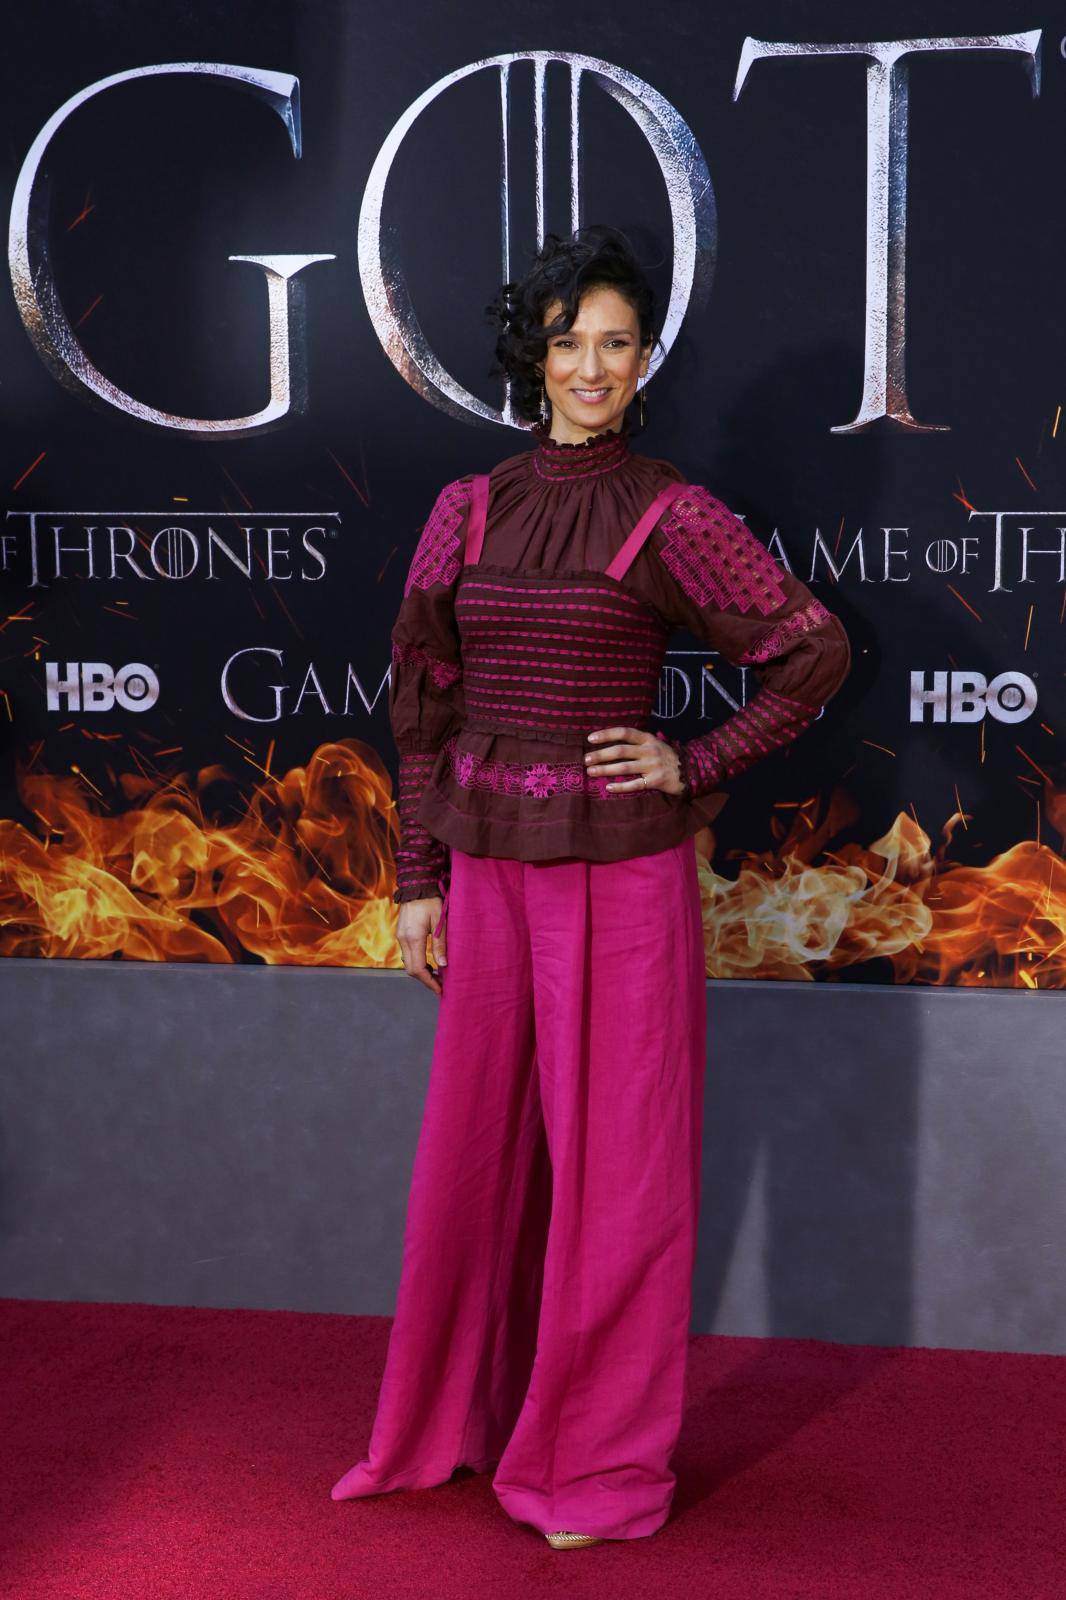 Indira Varma arrives for the premiere of the final season of "Game of Thrones" at Radio City Music Hall in New York